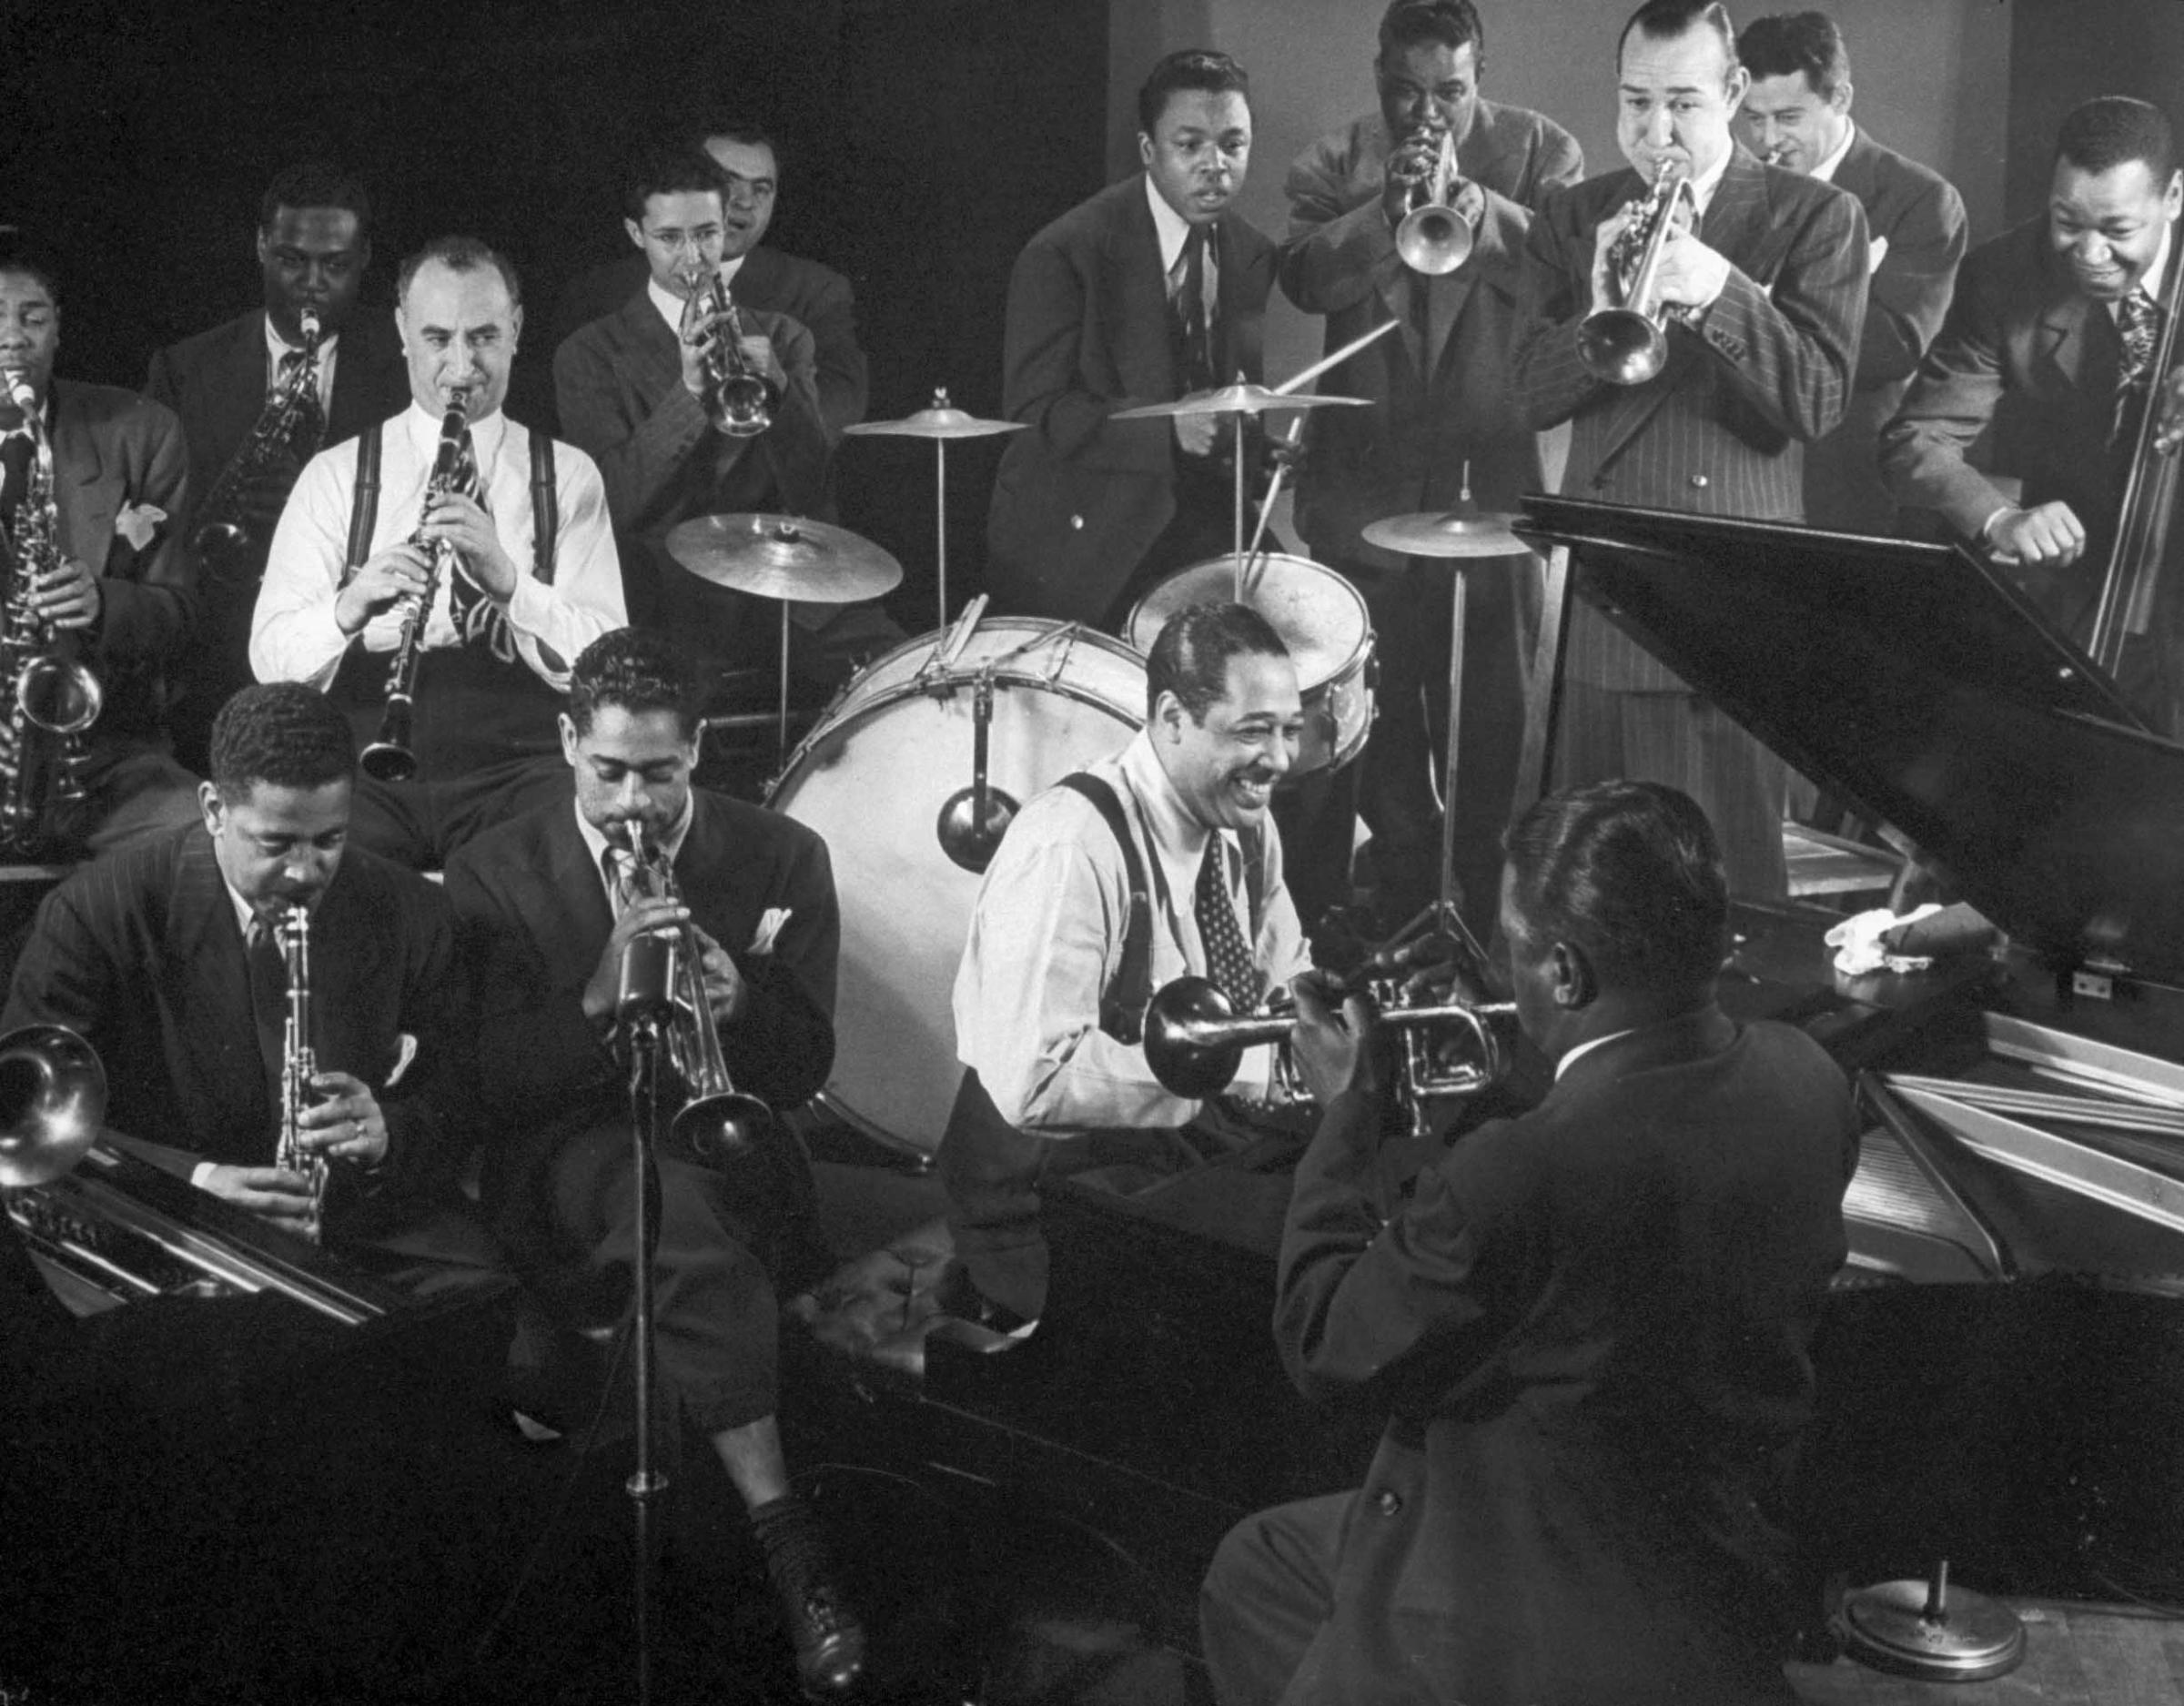 Duke Ellington at the piano as Dizzy Gillespie (seated behind Ellington) and others swing, 1943.